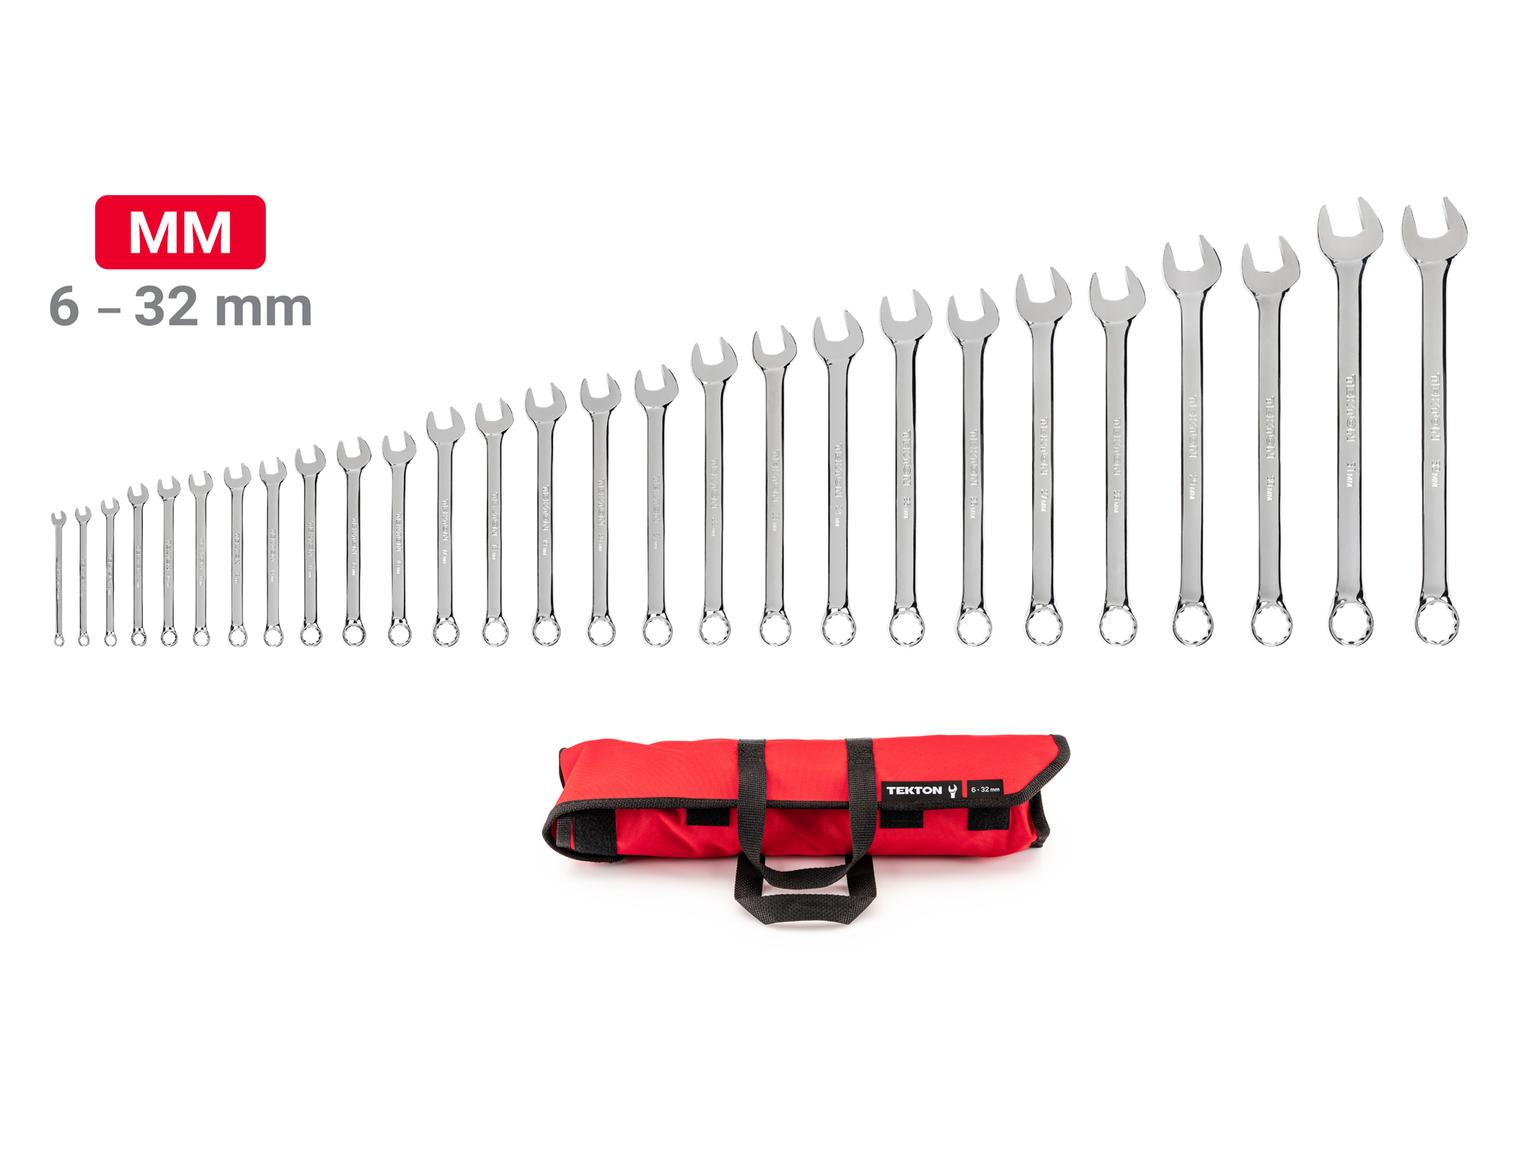 TEKTON WCB94203-T Combination Wrench Set with Pouch, 27-Piece (6 - 32 mm)